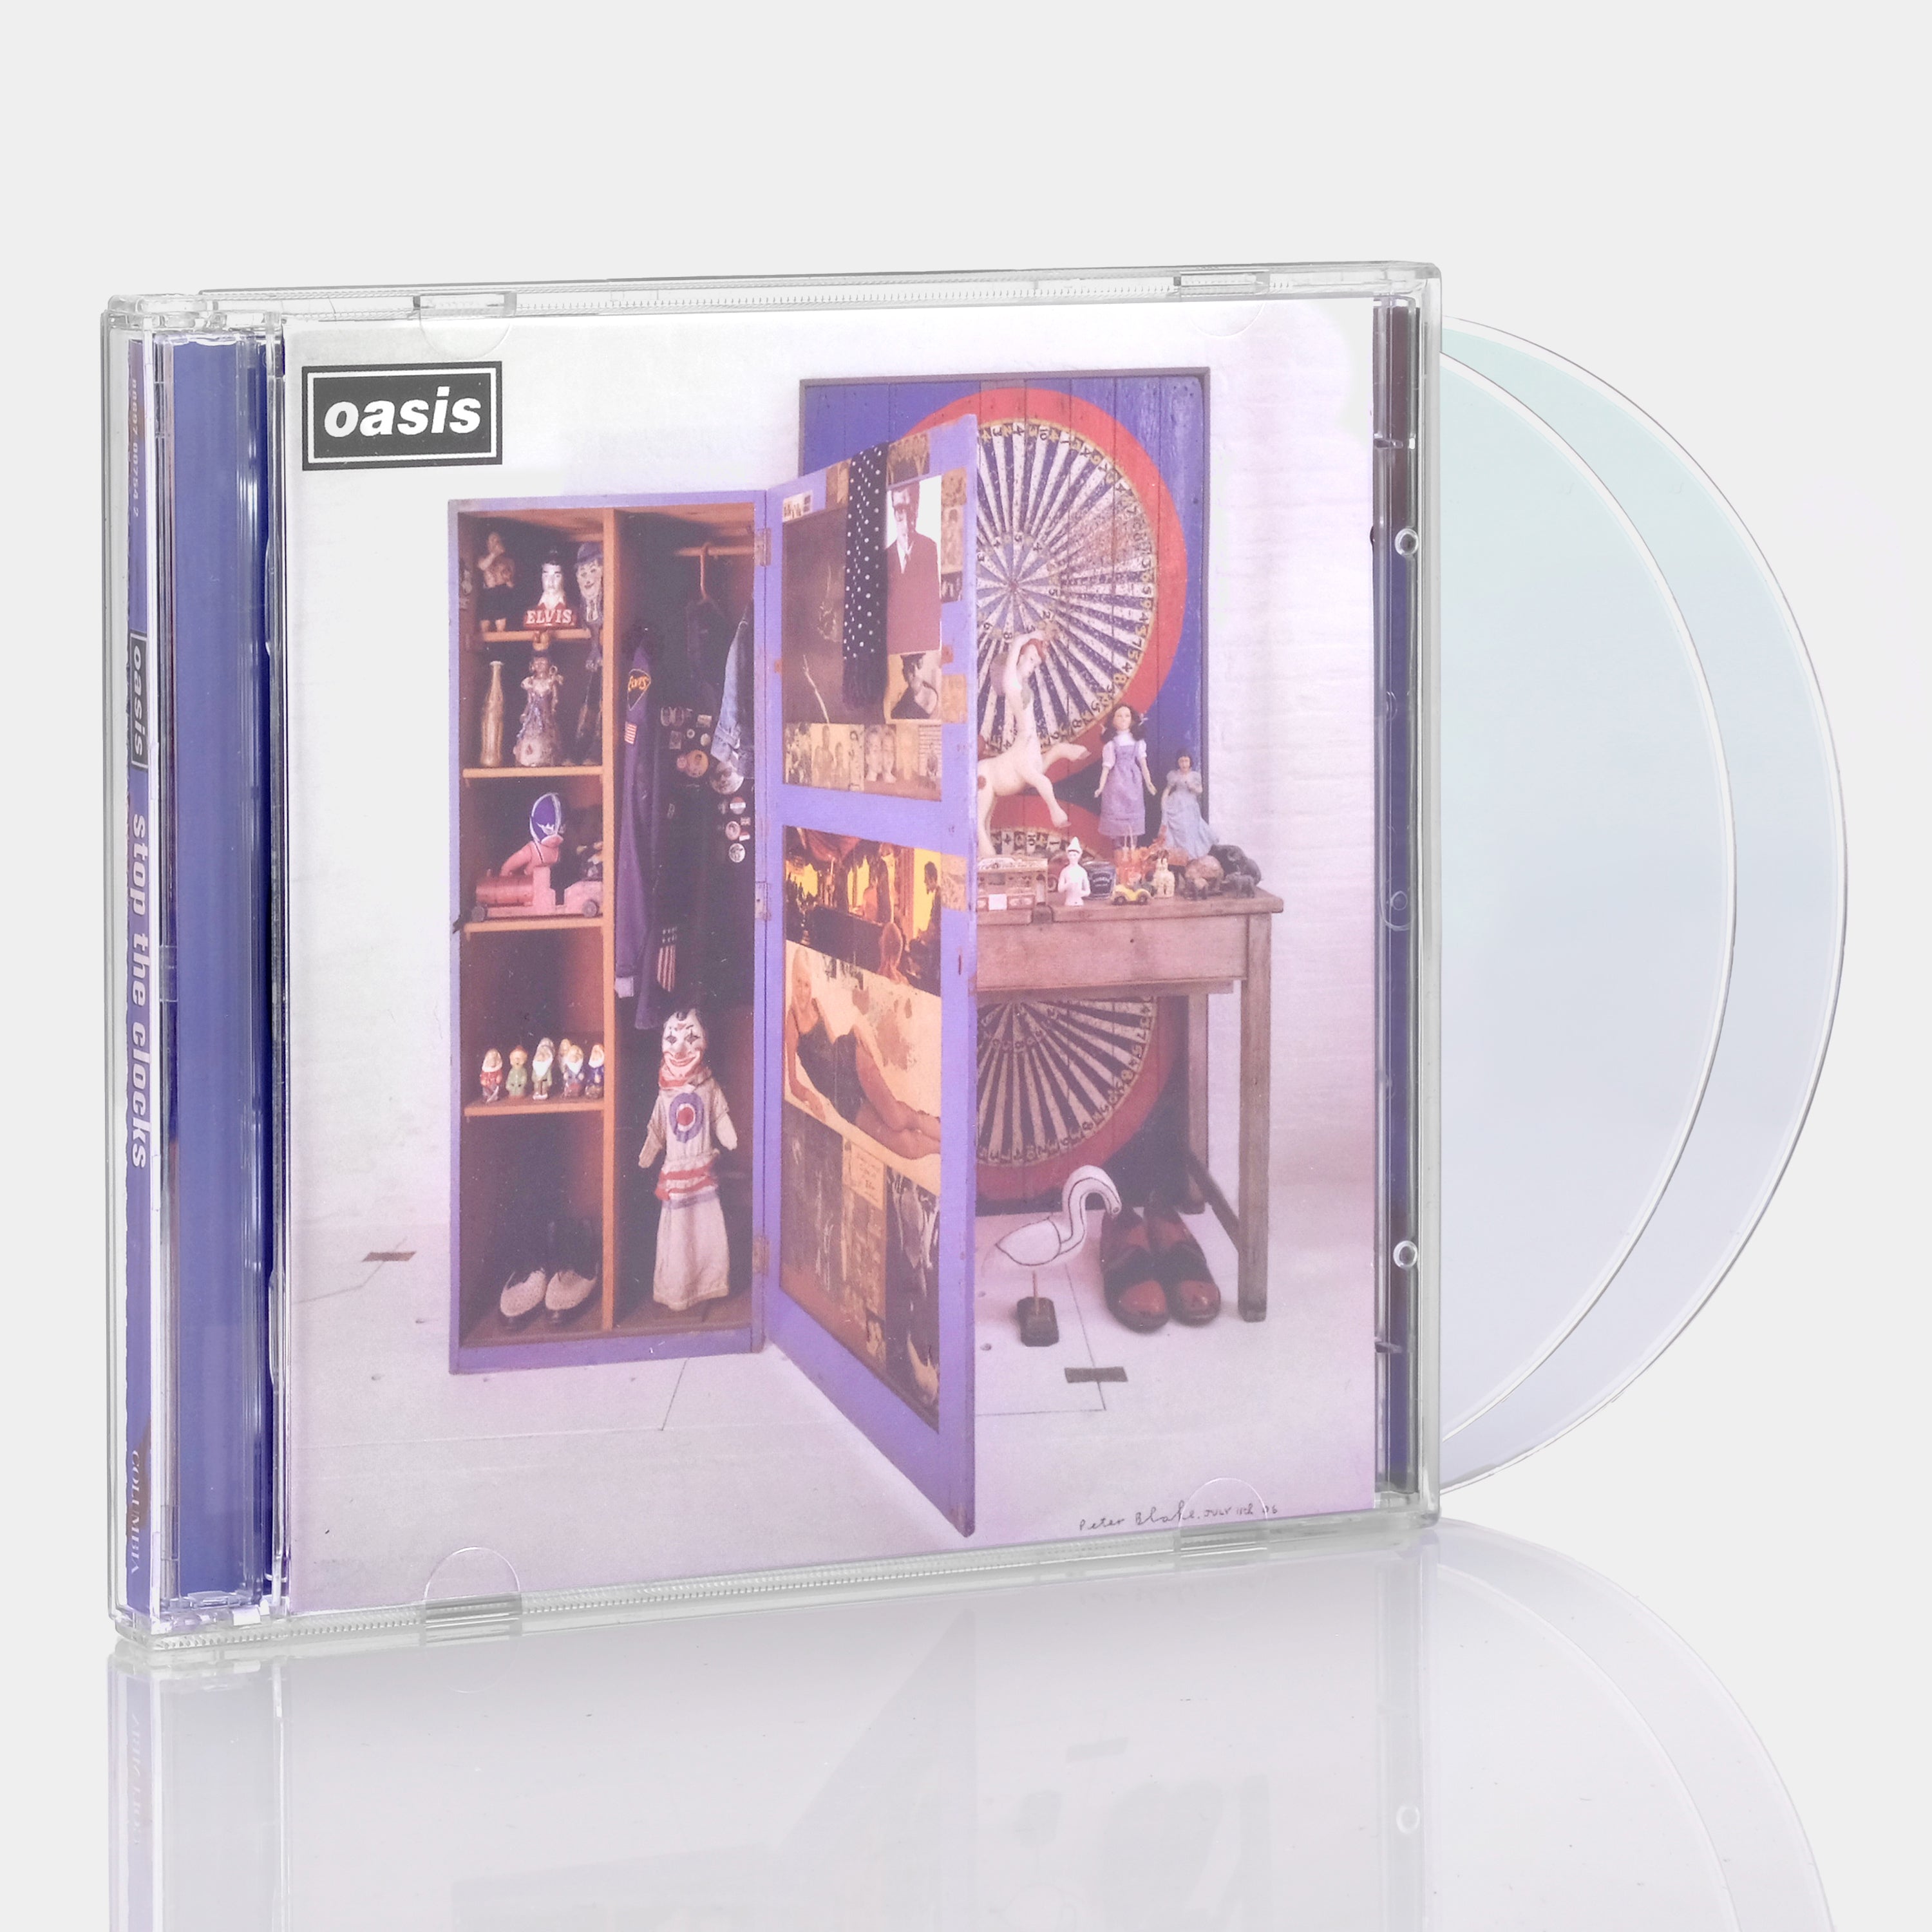 Oasis - Stop The Clocks 2xCD